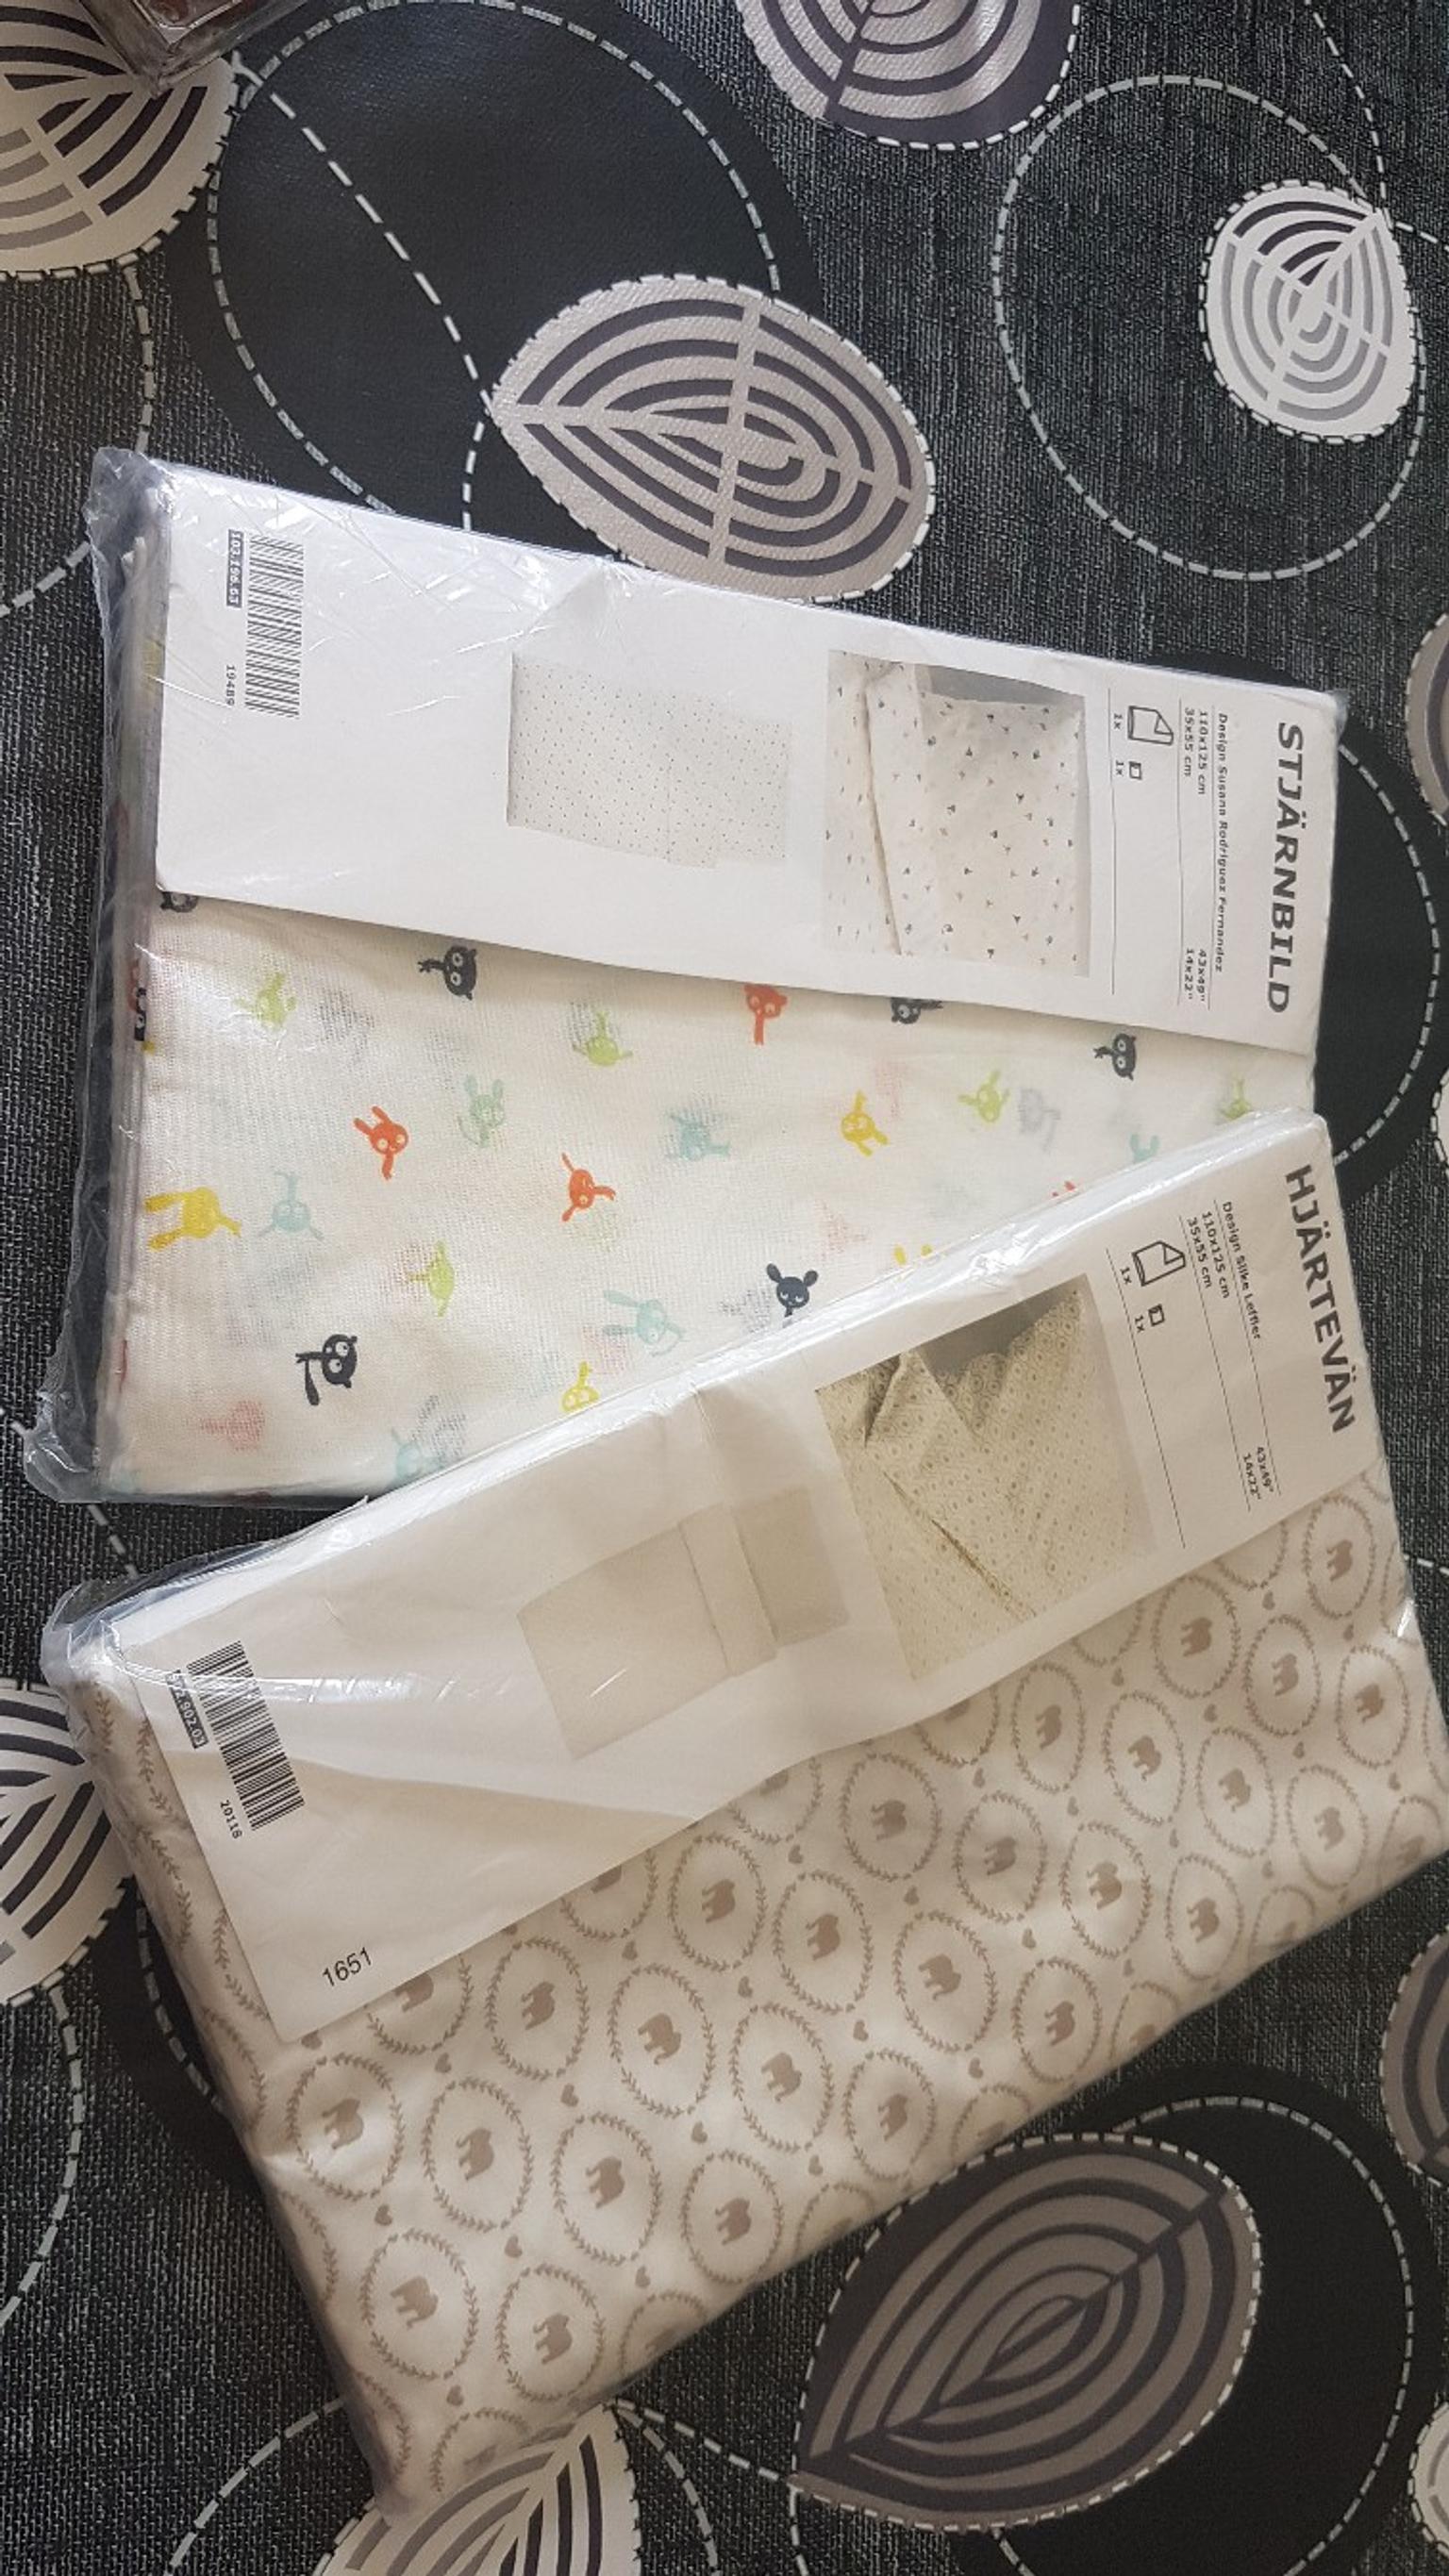 Brand New Ikea Kids Bed Sheets In London For 5 00 For Sale Shpock